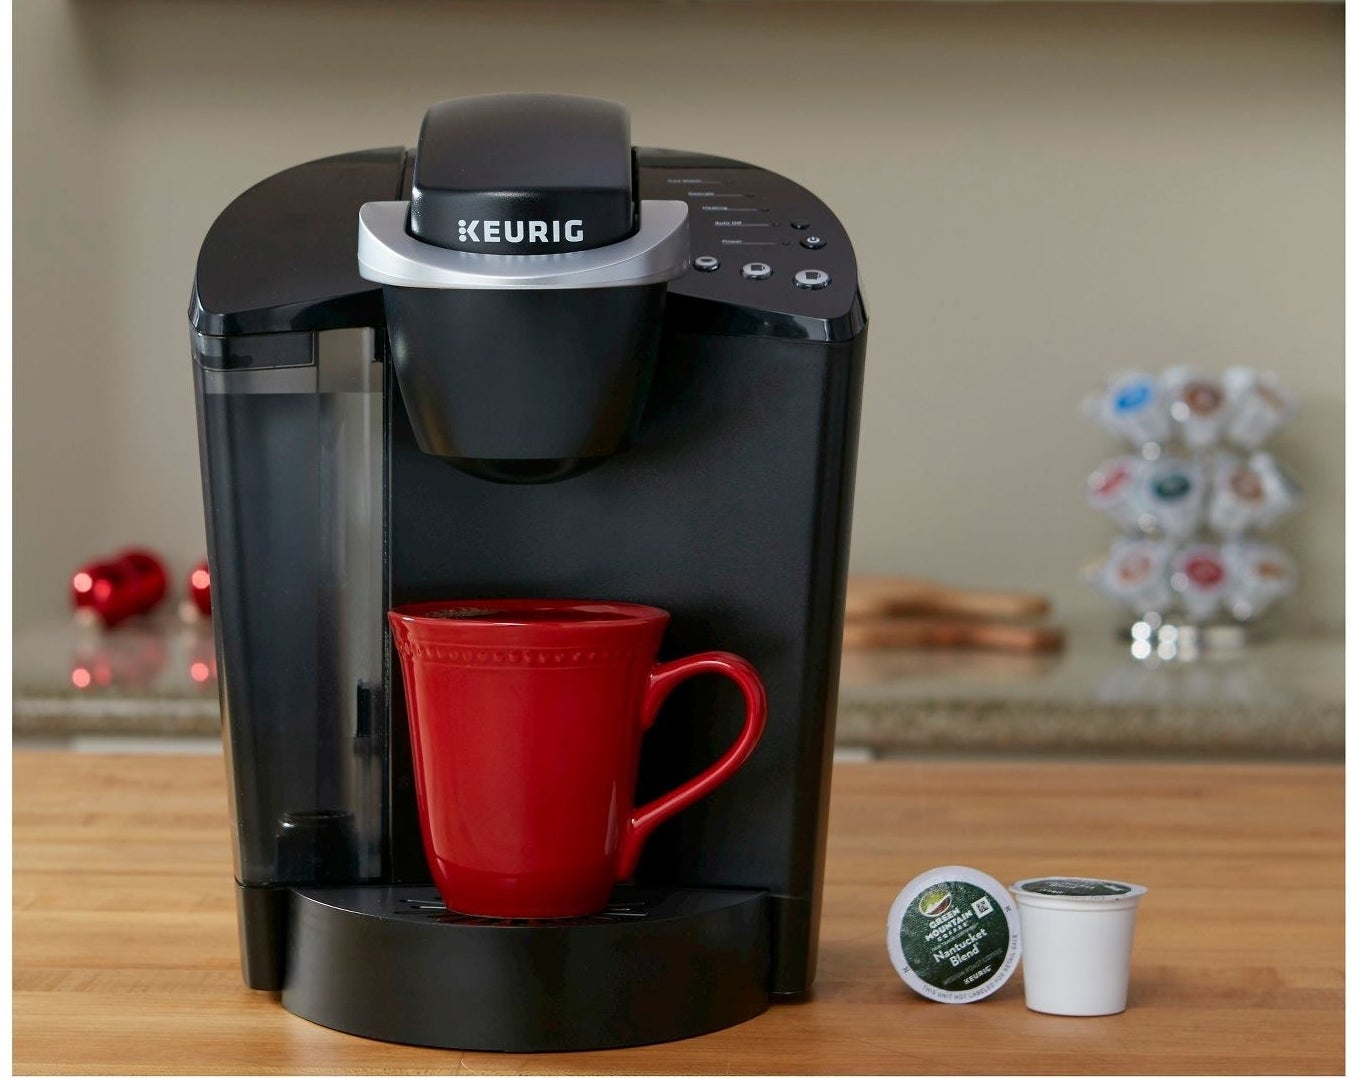 keurig coffee maker with red mug of coffee on a counter